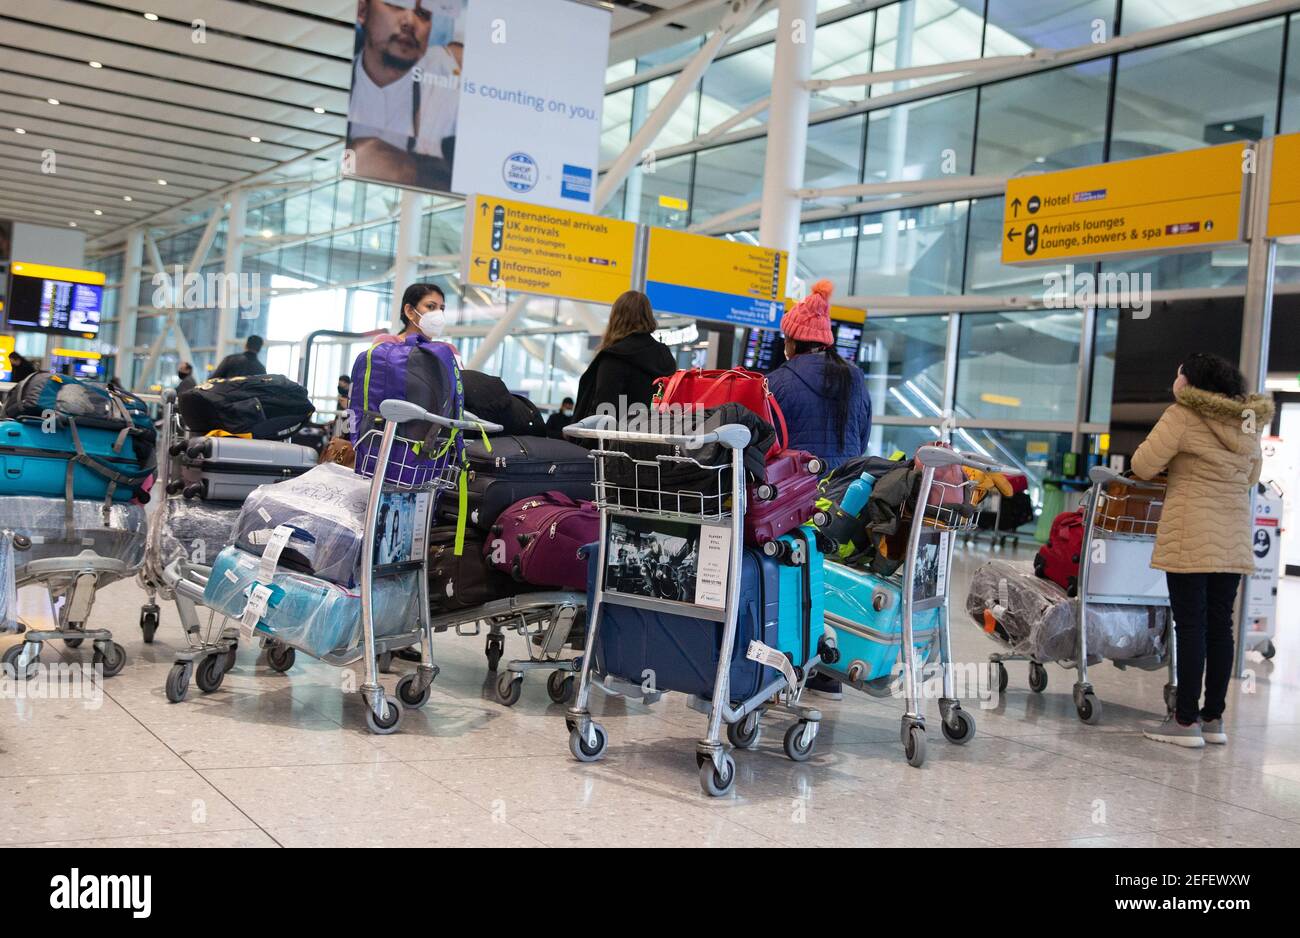 London, UK. 17th Feb, 2021. International passengers arriving at Heathrow Terminal 2. Anyone arriving from 'Red List' countries must quarantine in a hotel at the airport for 10 days at a cost of £1750. Credit: Mark Thomas/Alamy Live News Stock Photo